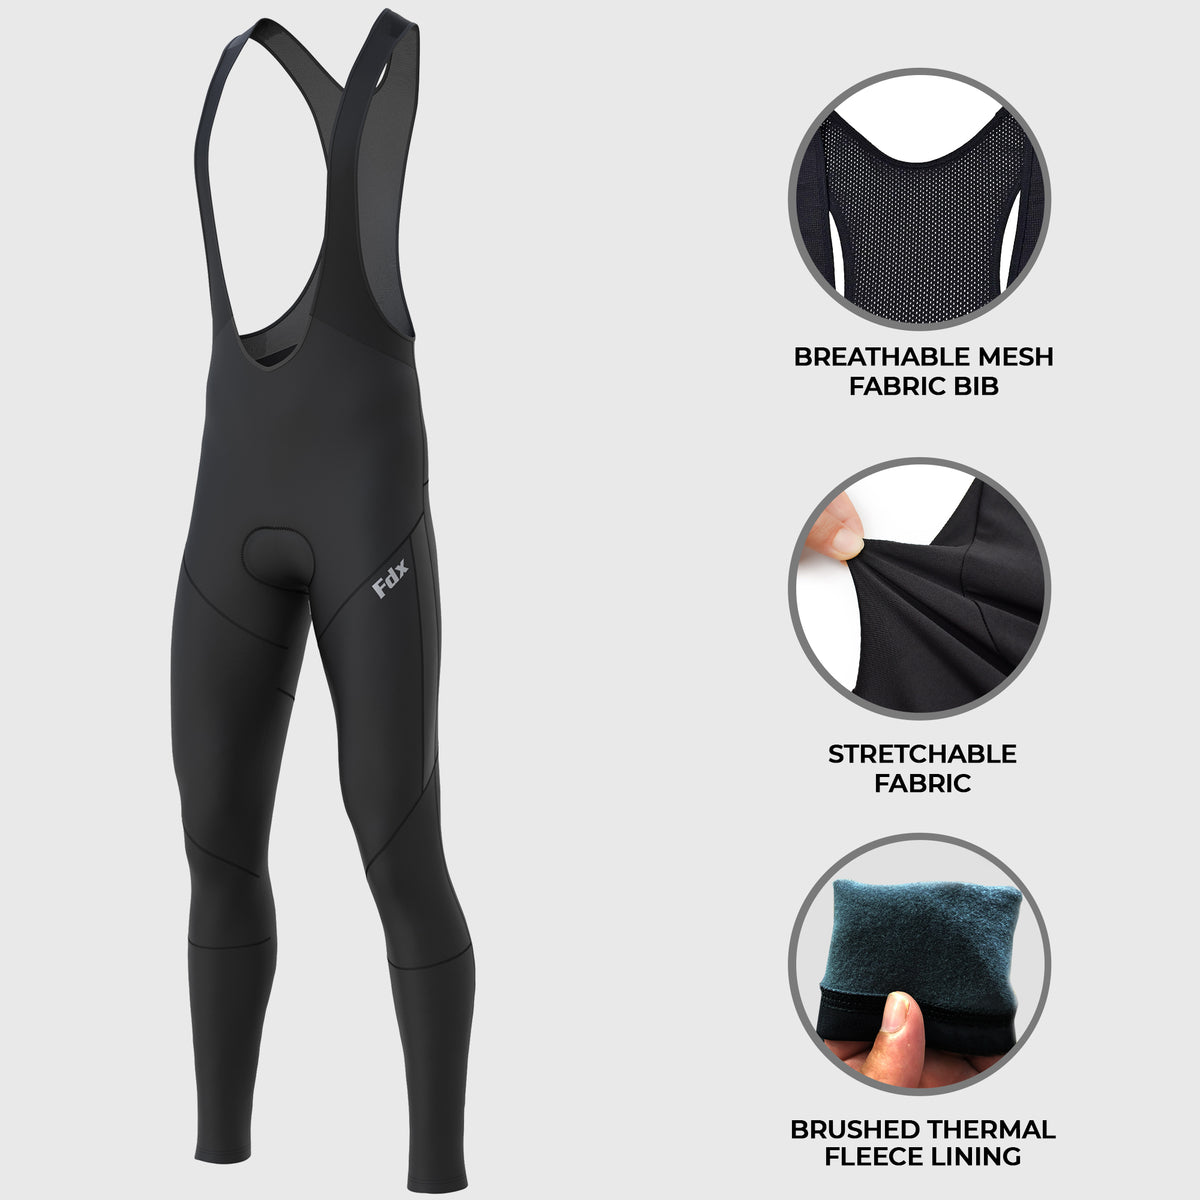 GORE WEAR Mens C3 Gore Windstopper Bib Tights+ Black S : :  Clothing, Shoes & Accessories